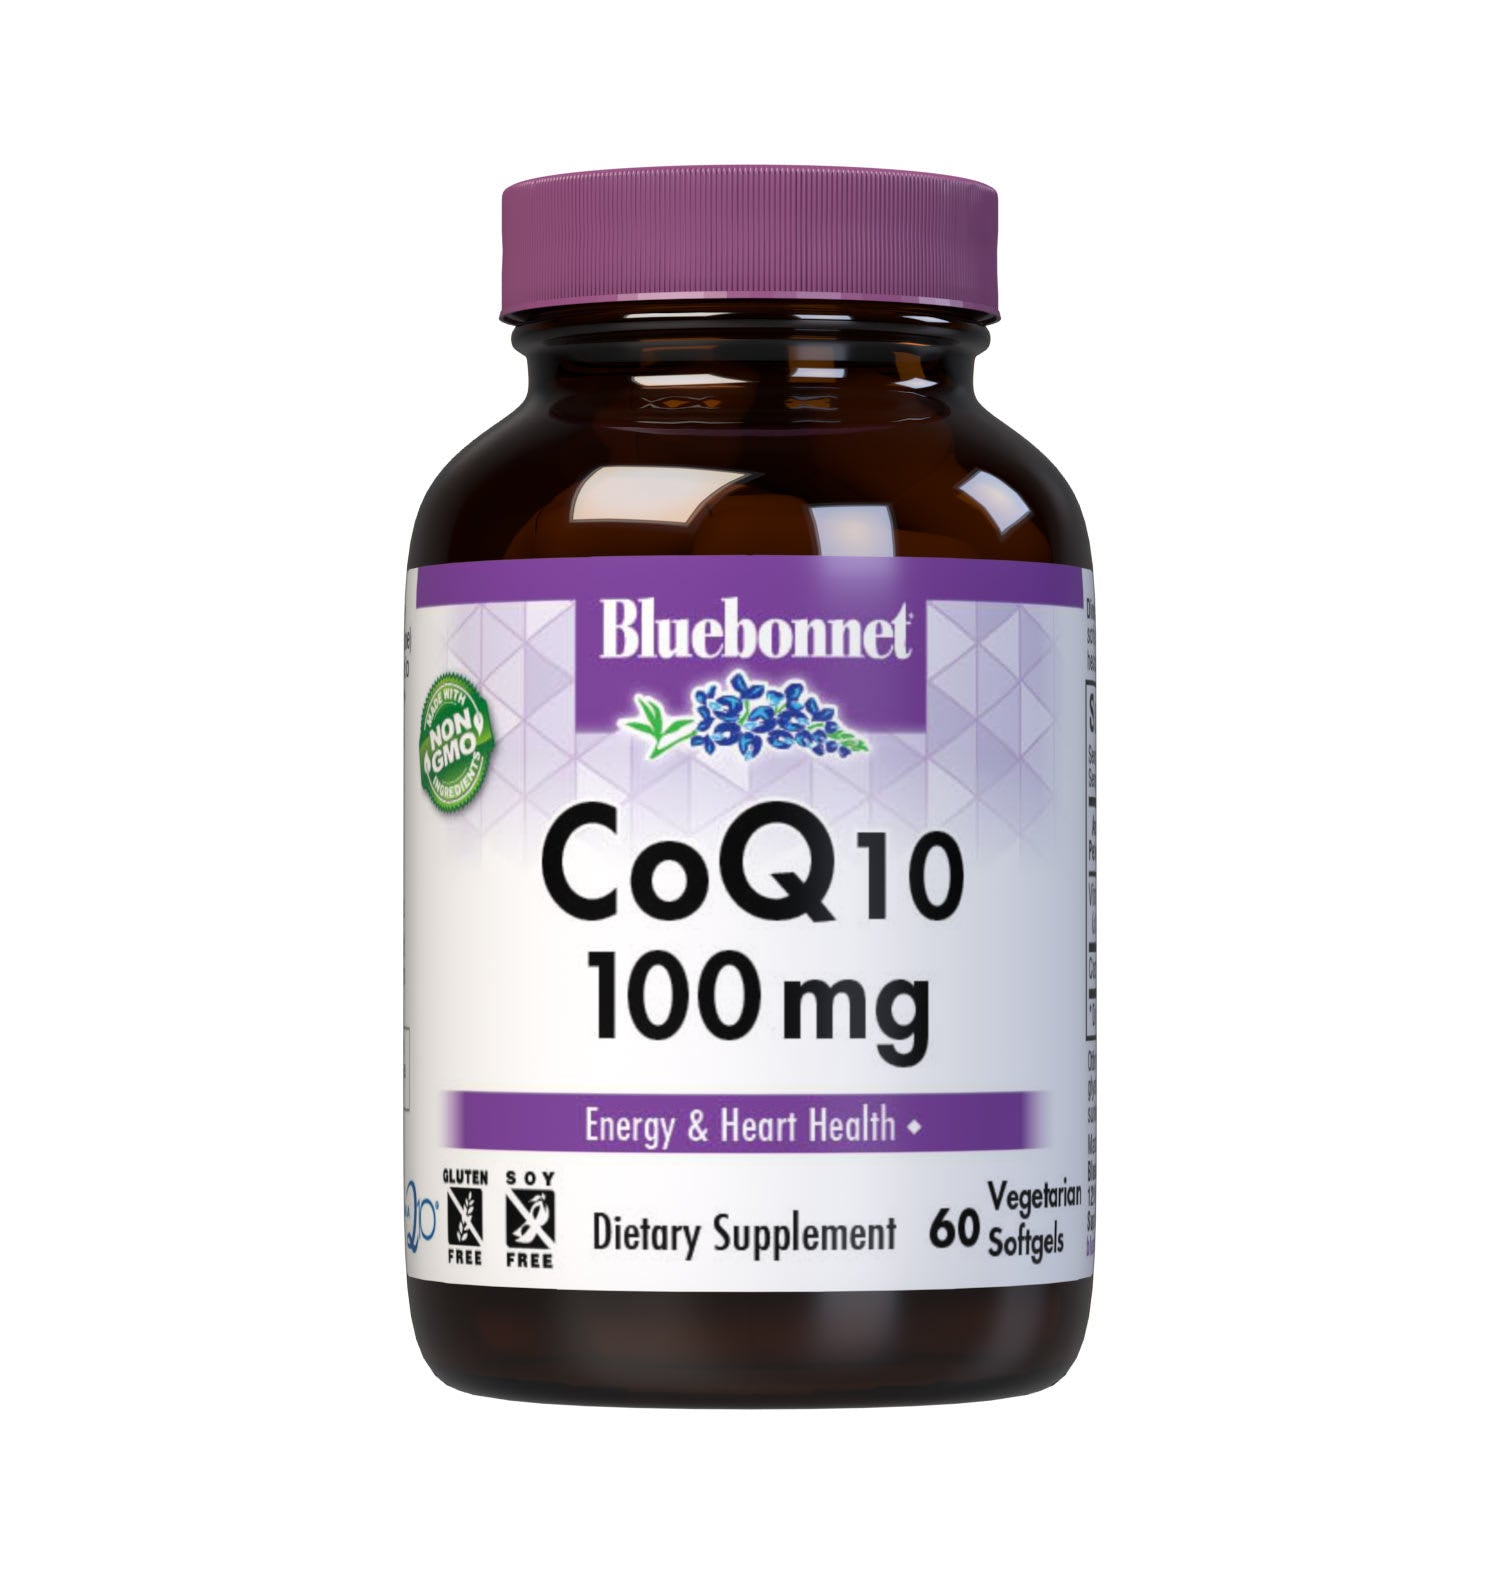 Bluebonnet’s CoQ10 30 mg 60 Vegetarian Softgels are formulated with the trans-isomer form of CoQ10 (ubiquinone) in a base of non-GMO sunflower oil along with vitamin E to support energy levels and cardiovascular health. #size_60 count